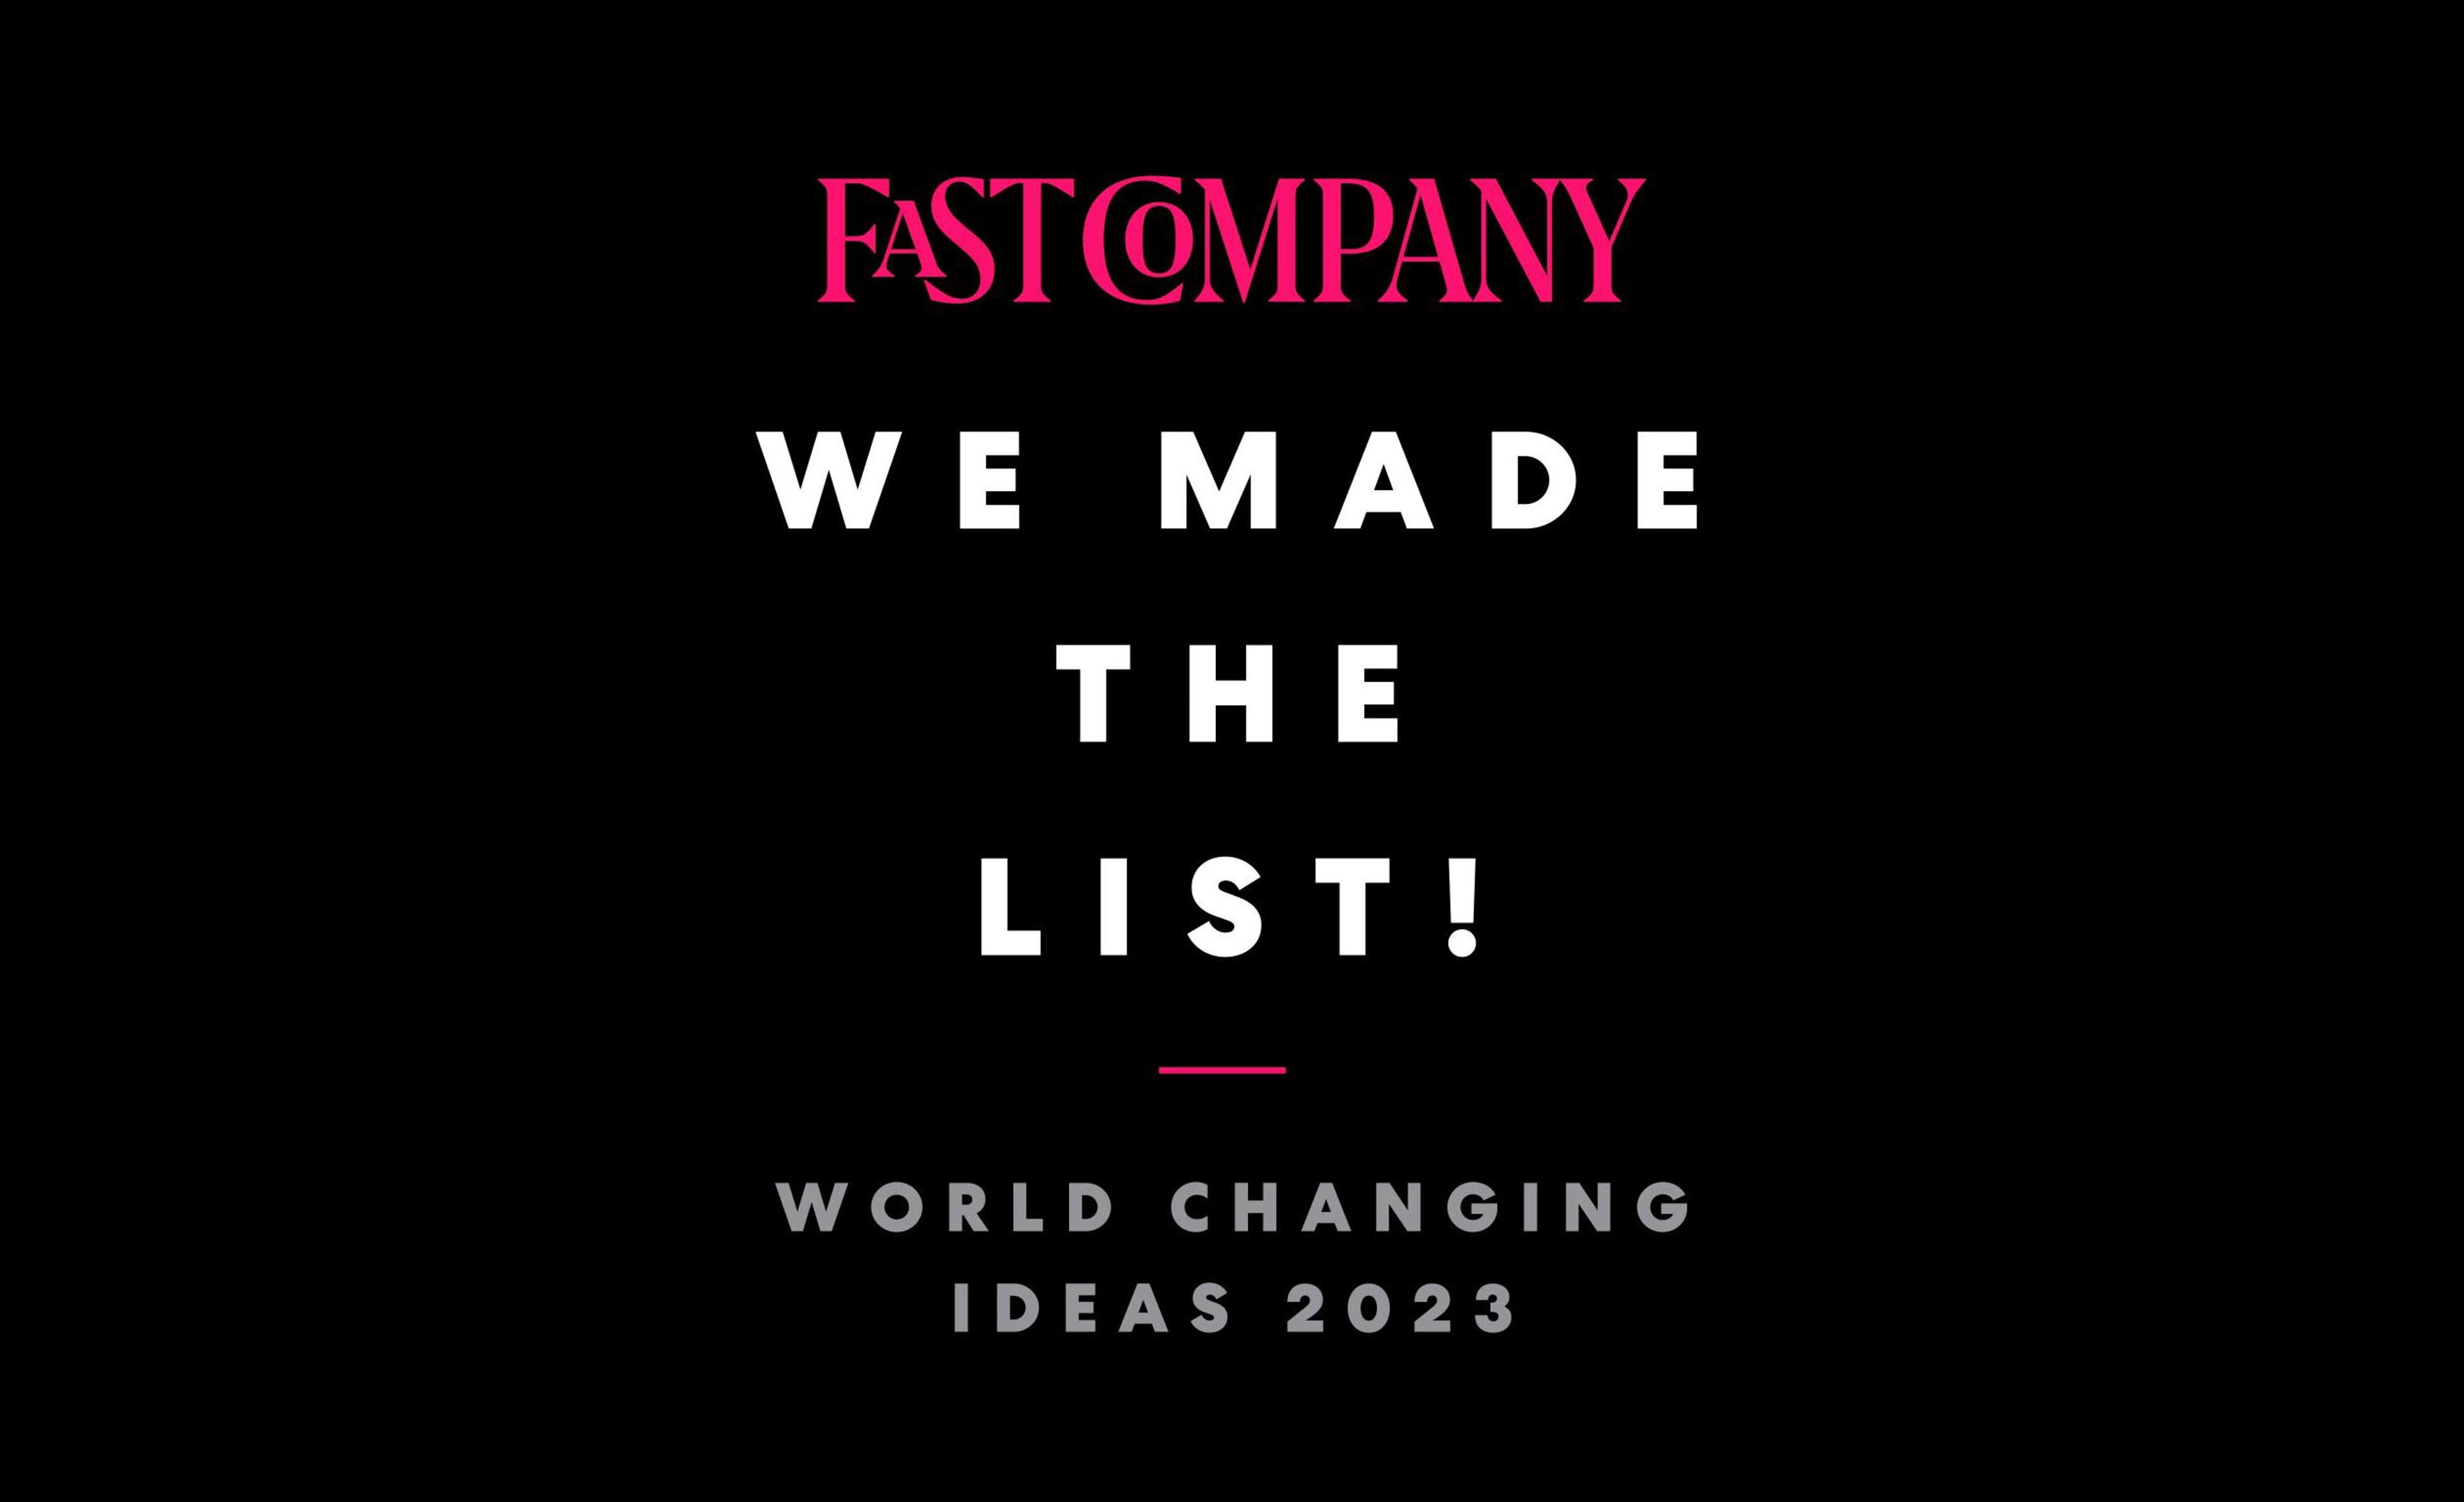 We made the list Fast Company with our warehouse automation solution Pio